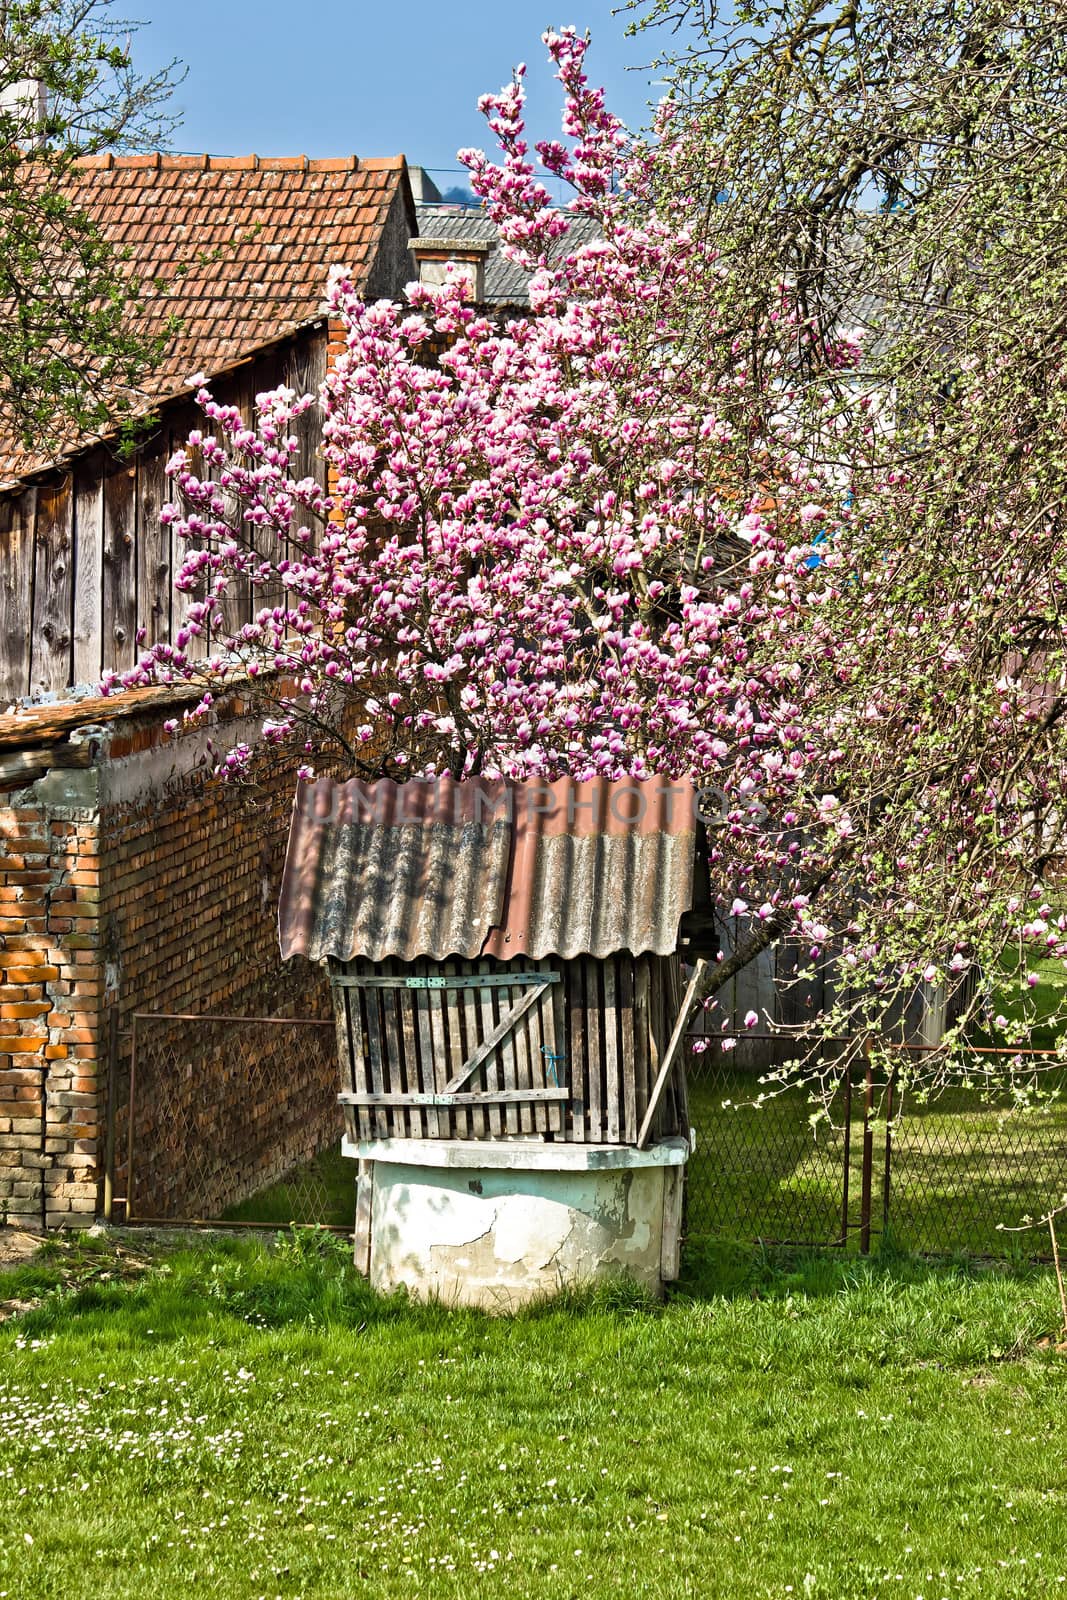 Old water well under blossom magnolia tree, vertical view